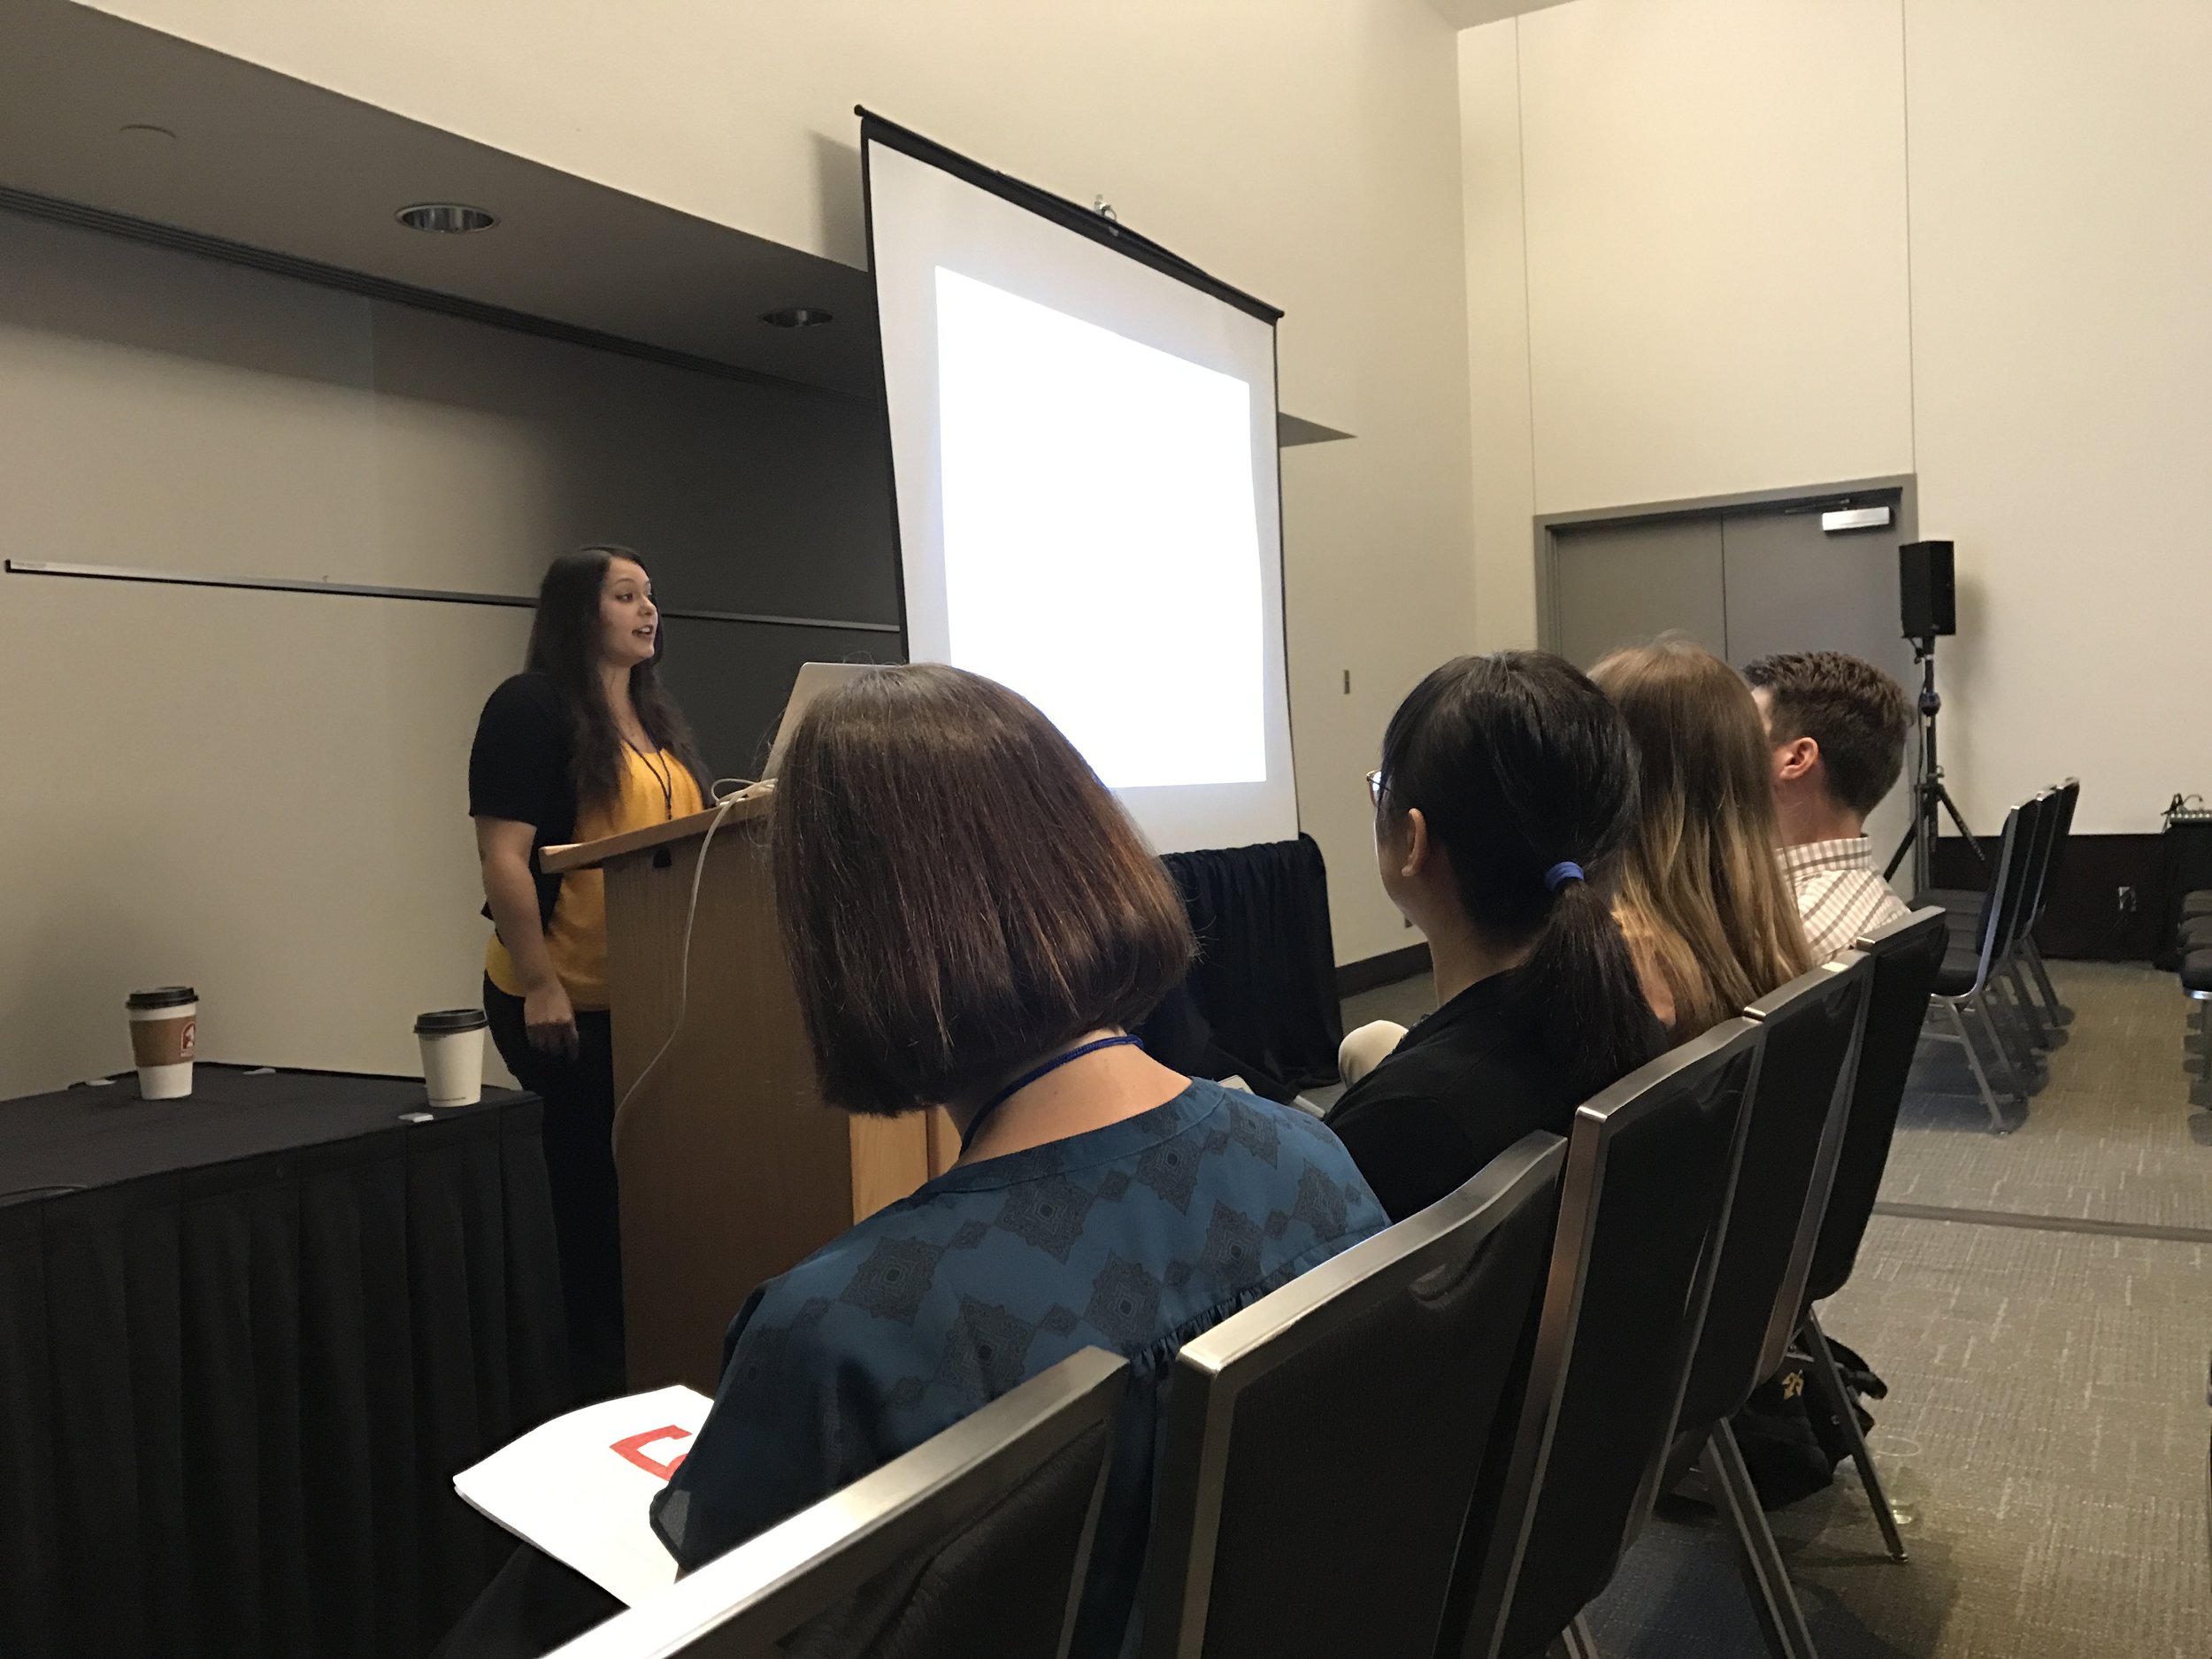  Dr. Candace Lapan giving a talk on her research about children's use of traits for diverse groups of peers at SRCD 2017 